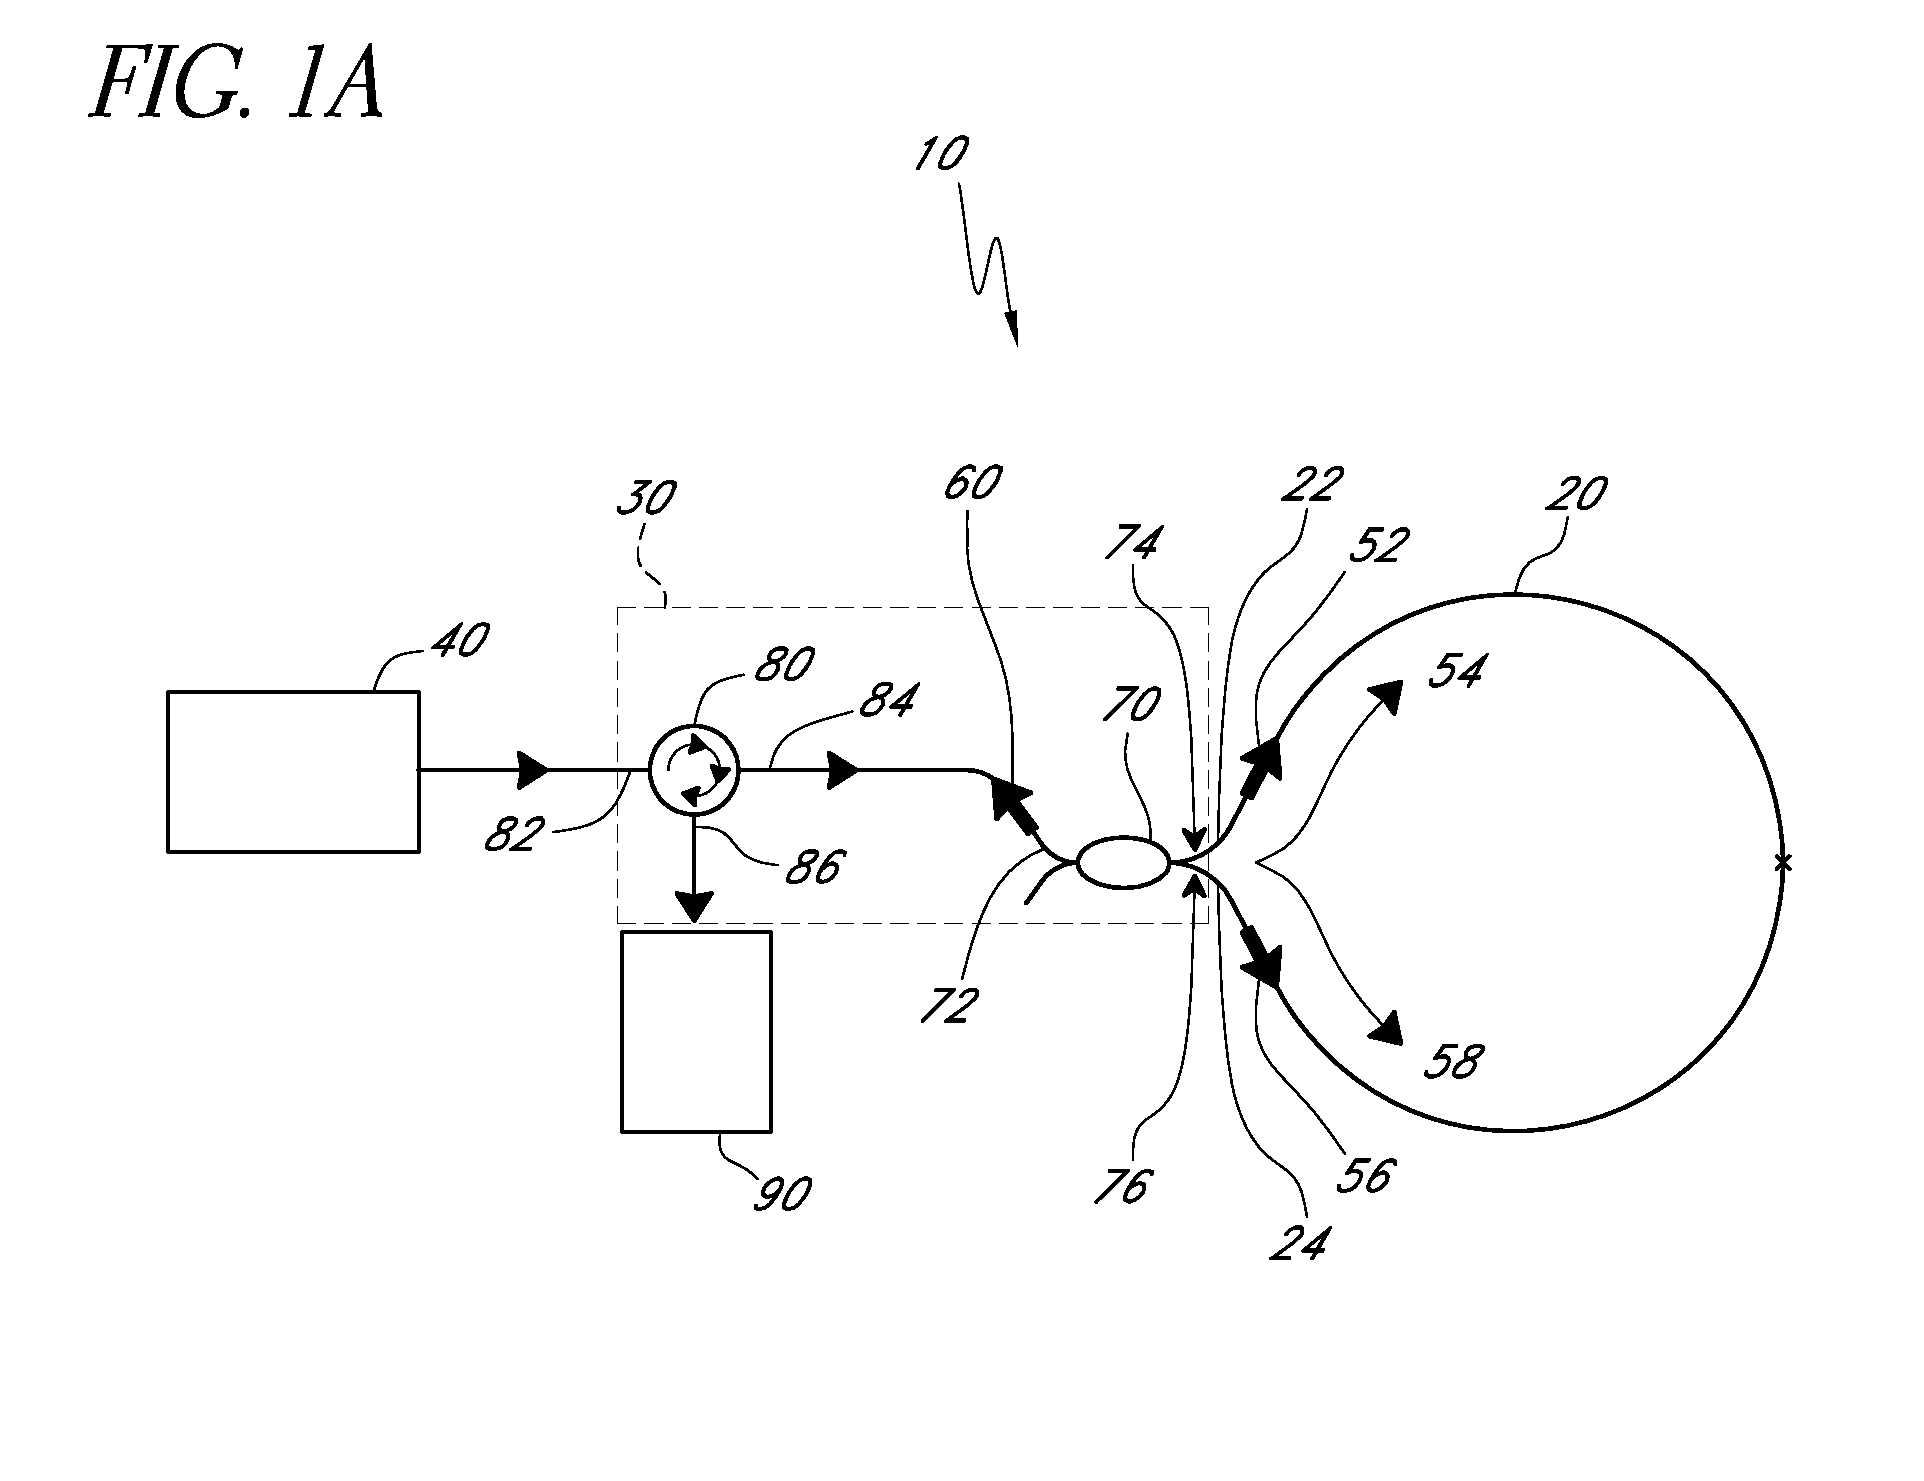 Laser-driven optical gyroscope having a non-negligible source coherence length